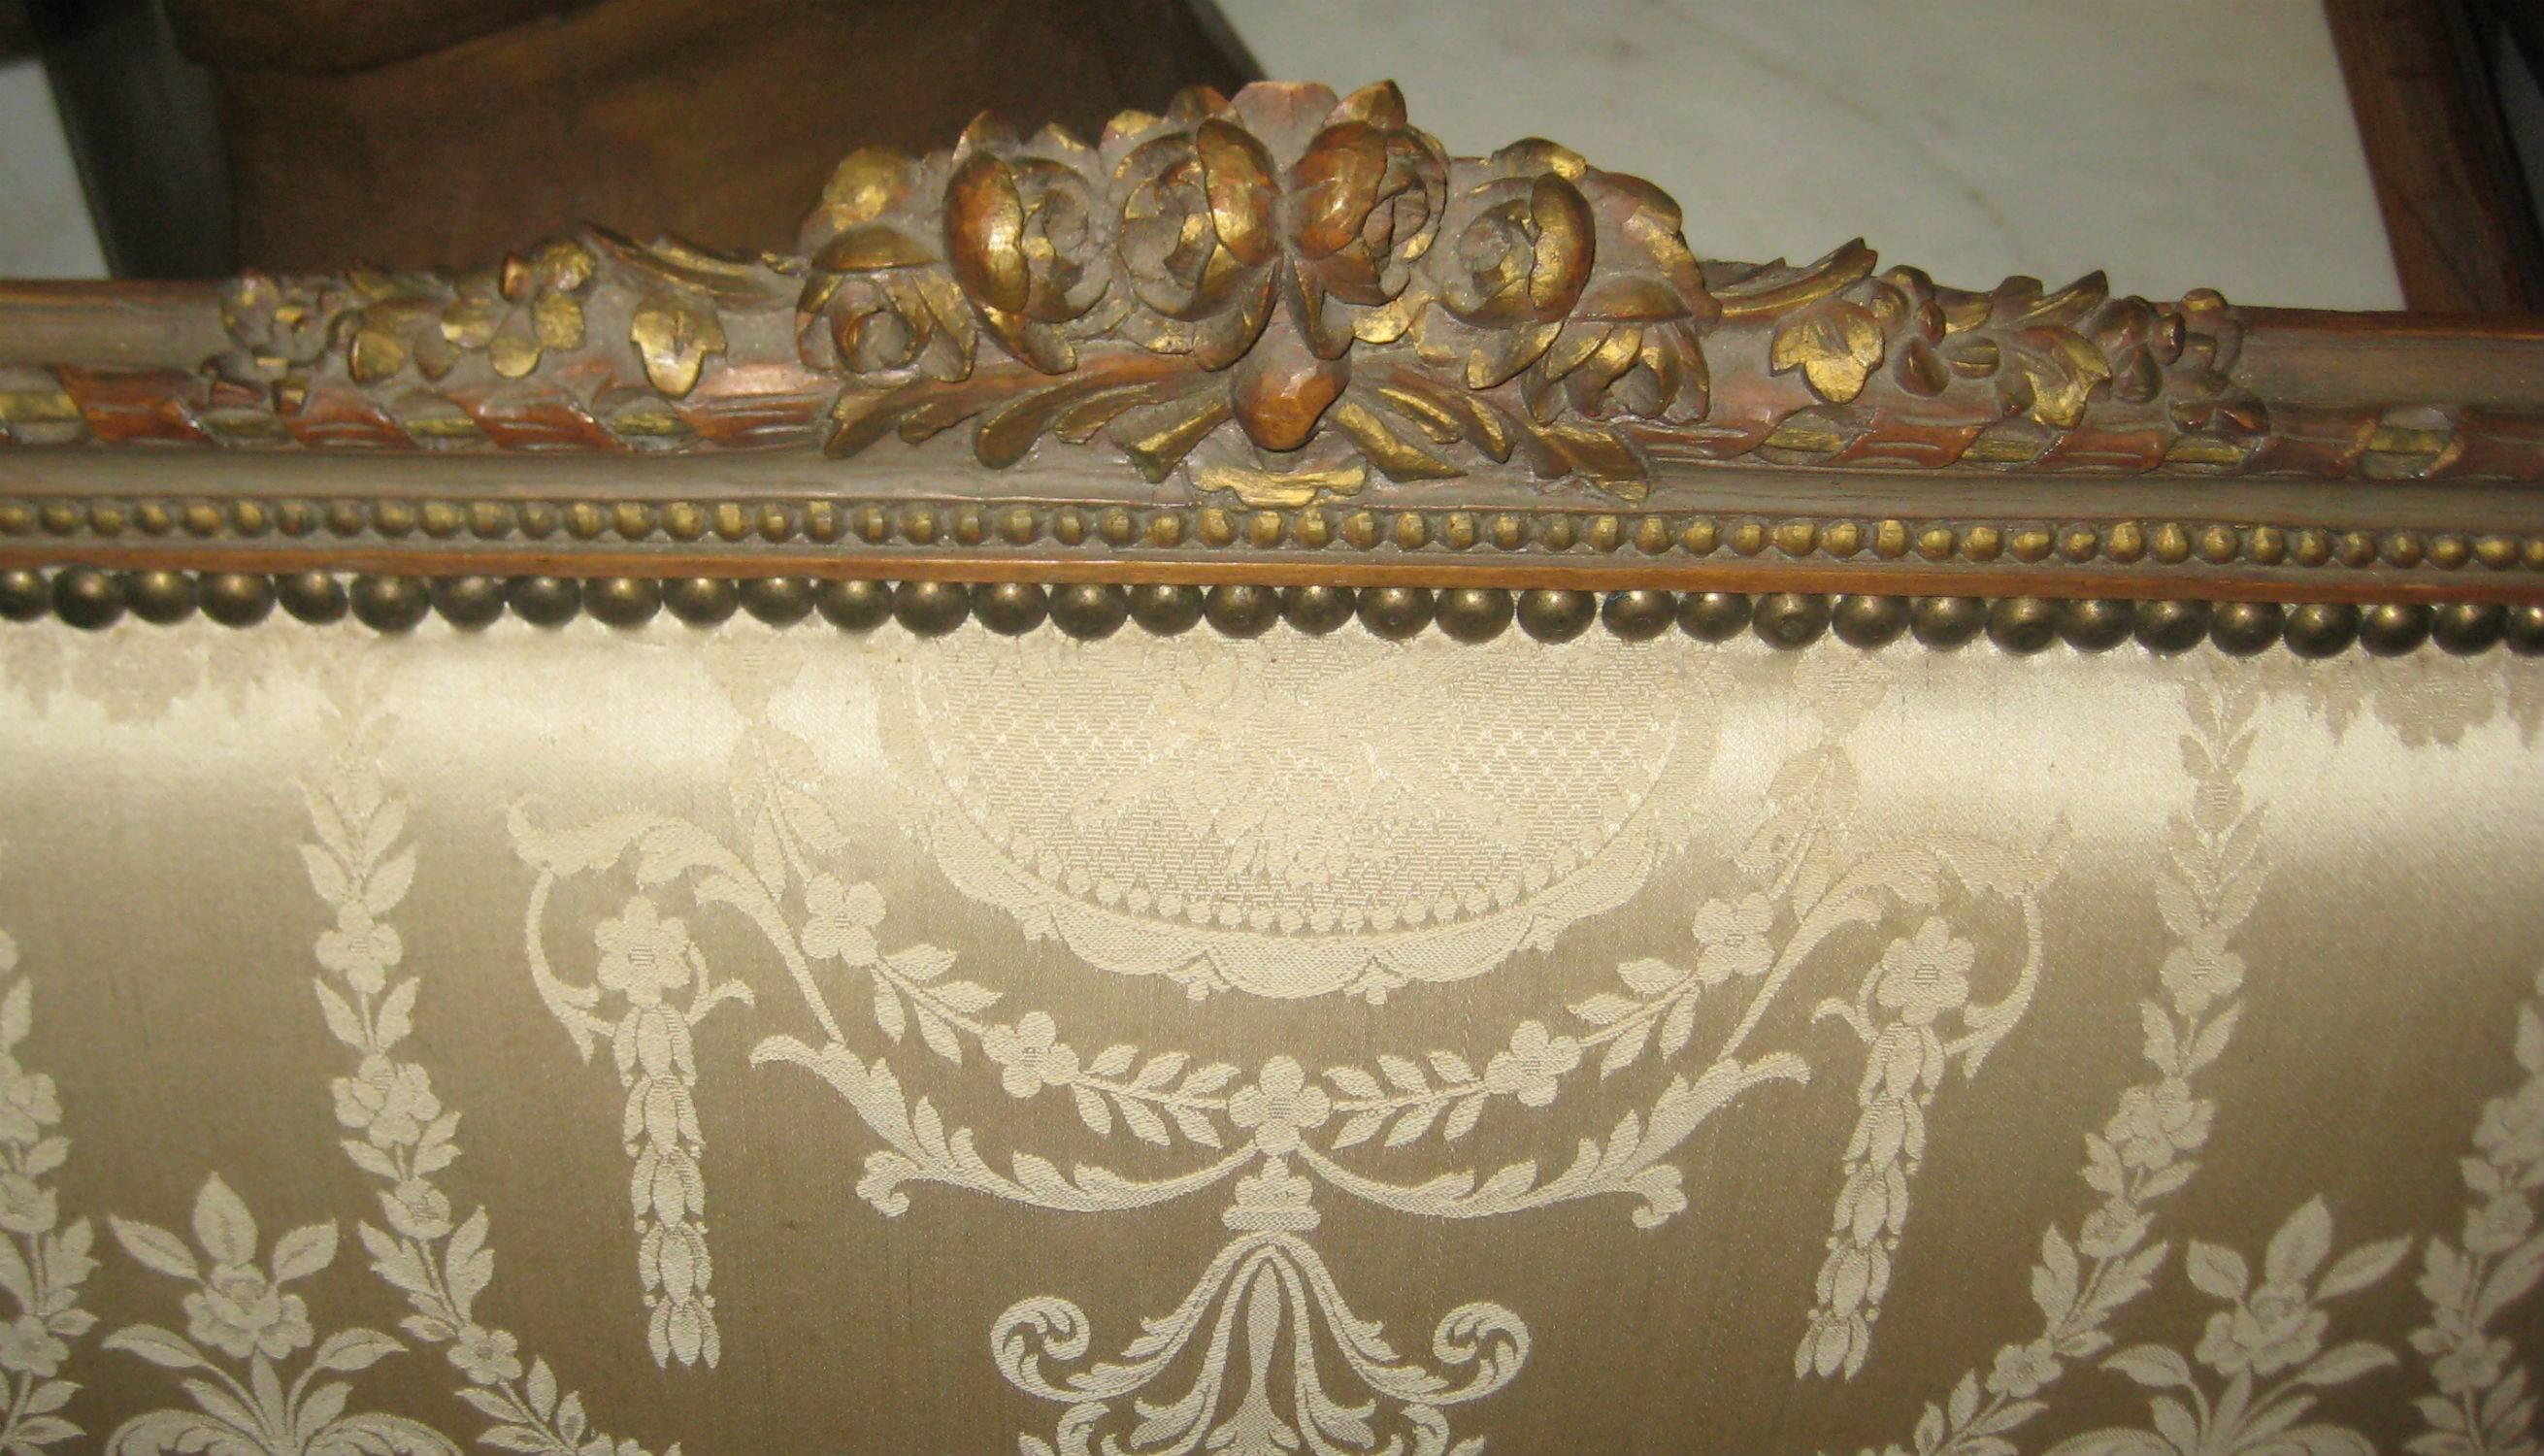 Louis XVI style carved fruitwood and partial-gilt damask upholstered sofa (canapé) with down seat.

After 43 years of business we are retiring. Everything must be sold. Many of the pieces listed here on 1stdibs represent markdowns below our cost.